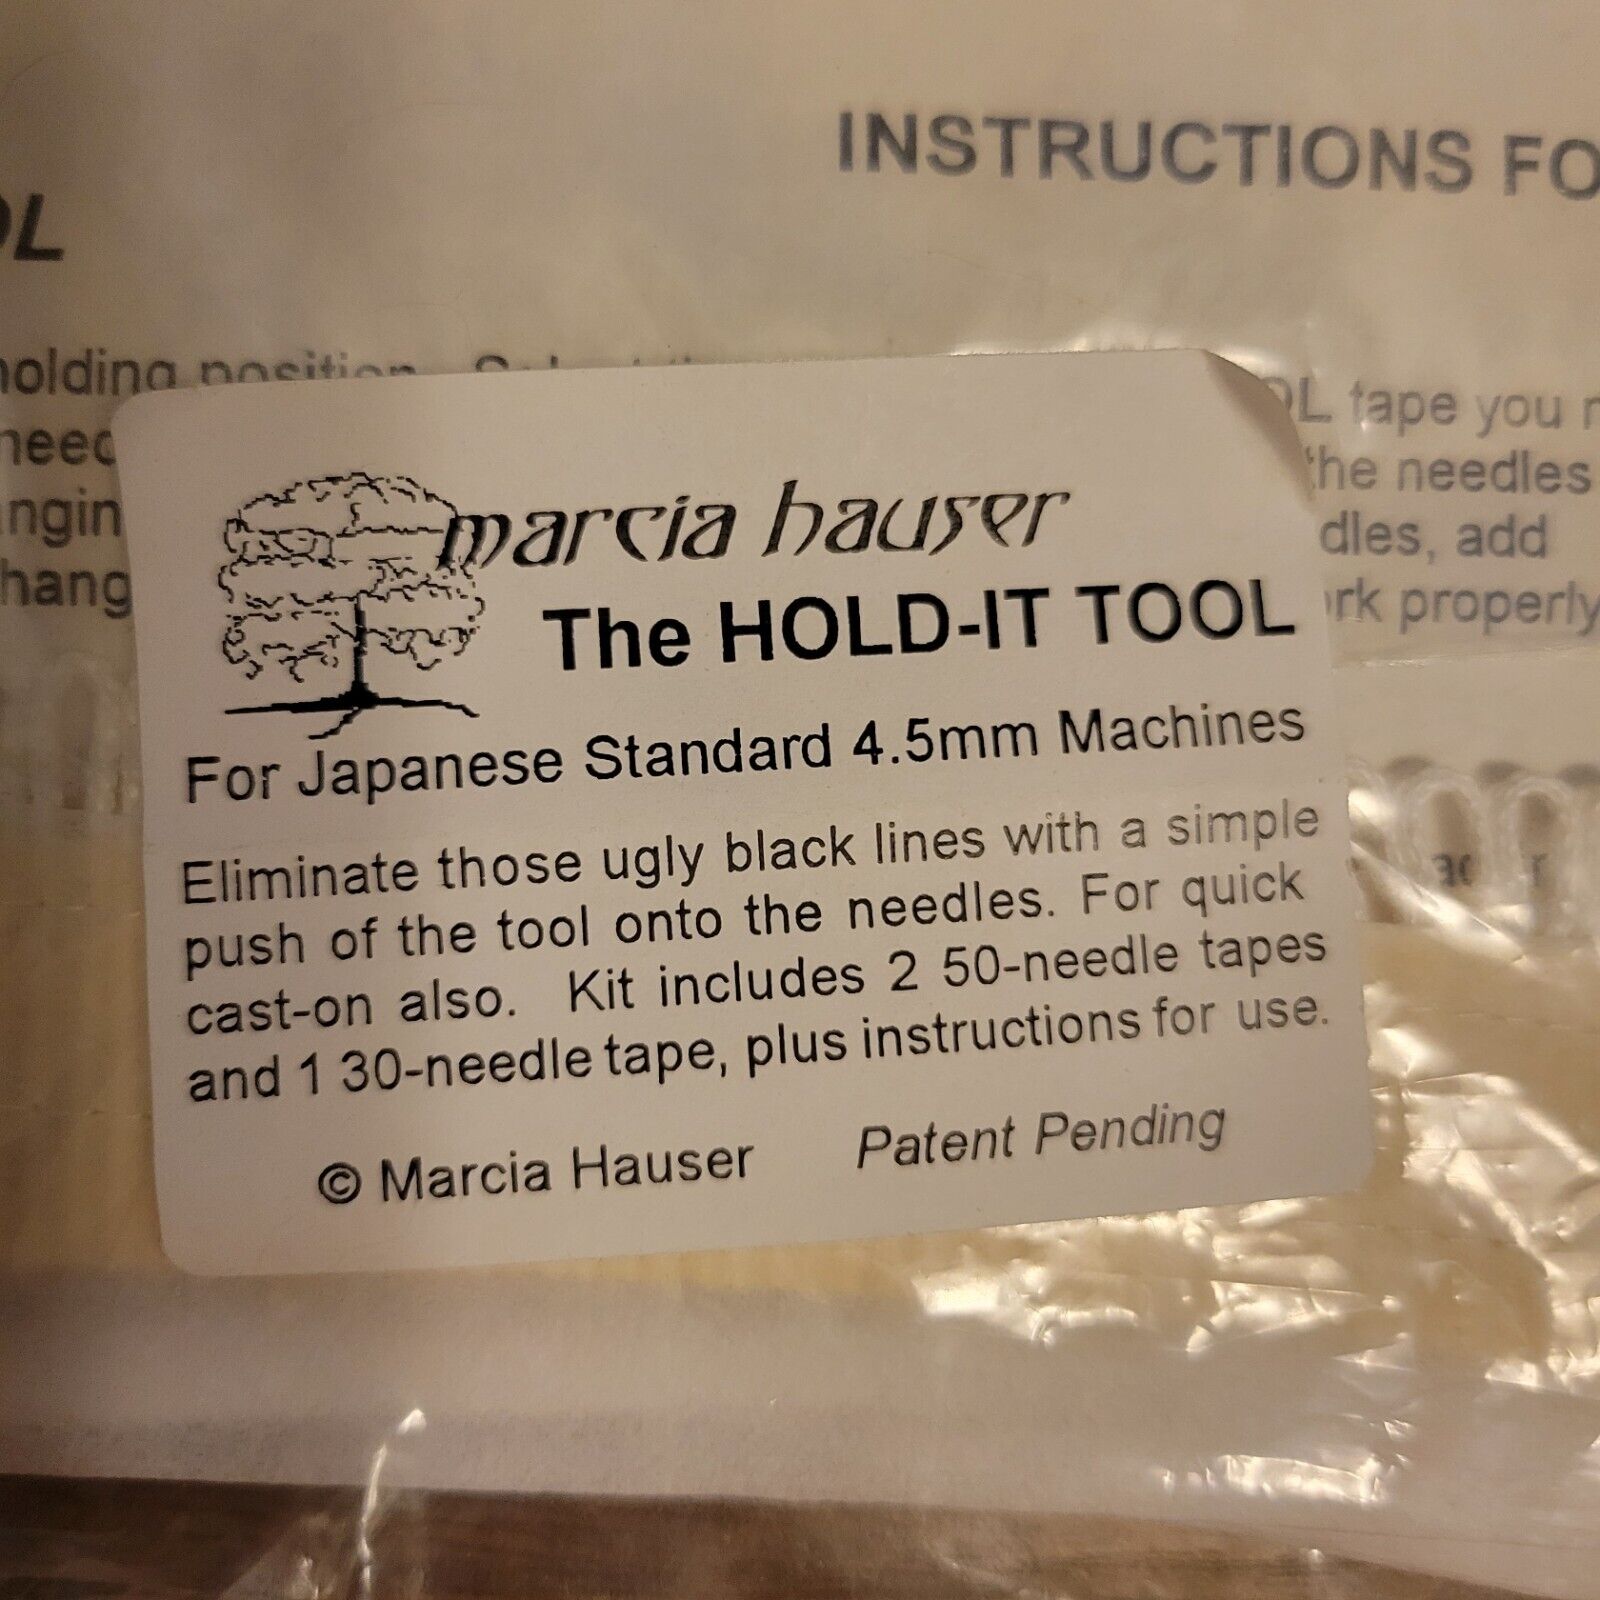 Marcia Hauser "the Hold-it Tool" For Japanese Standard 4.5mm Machines